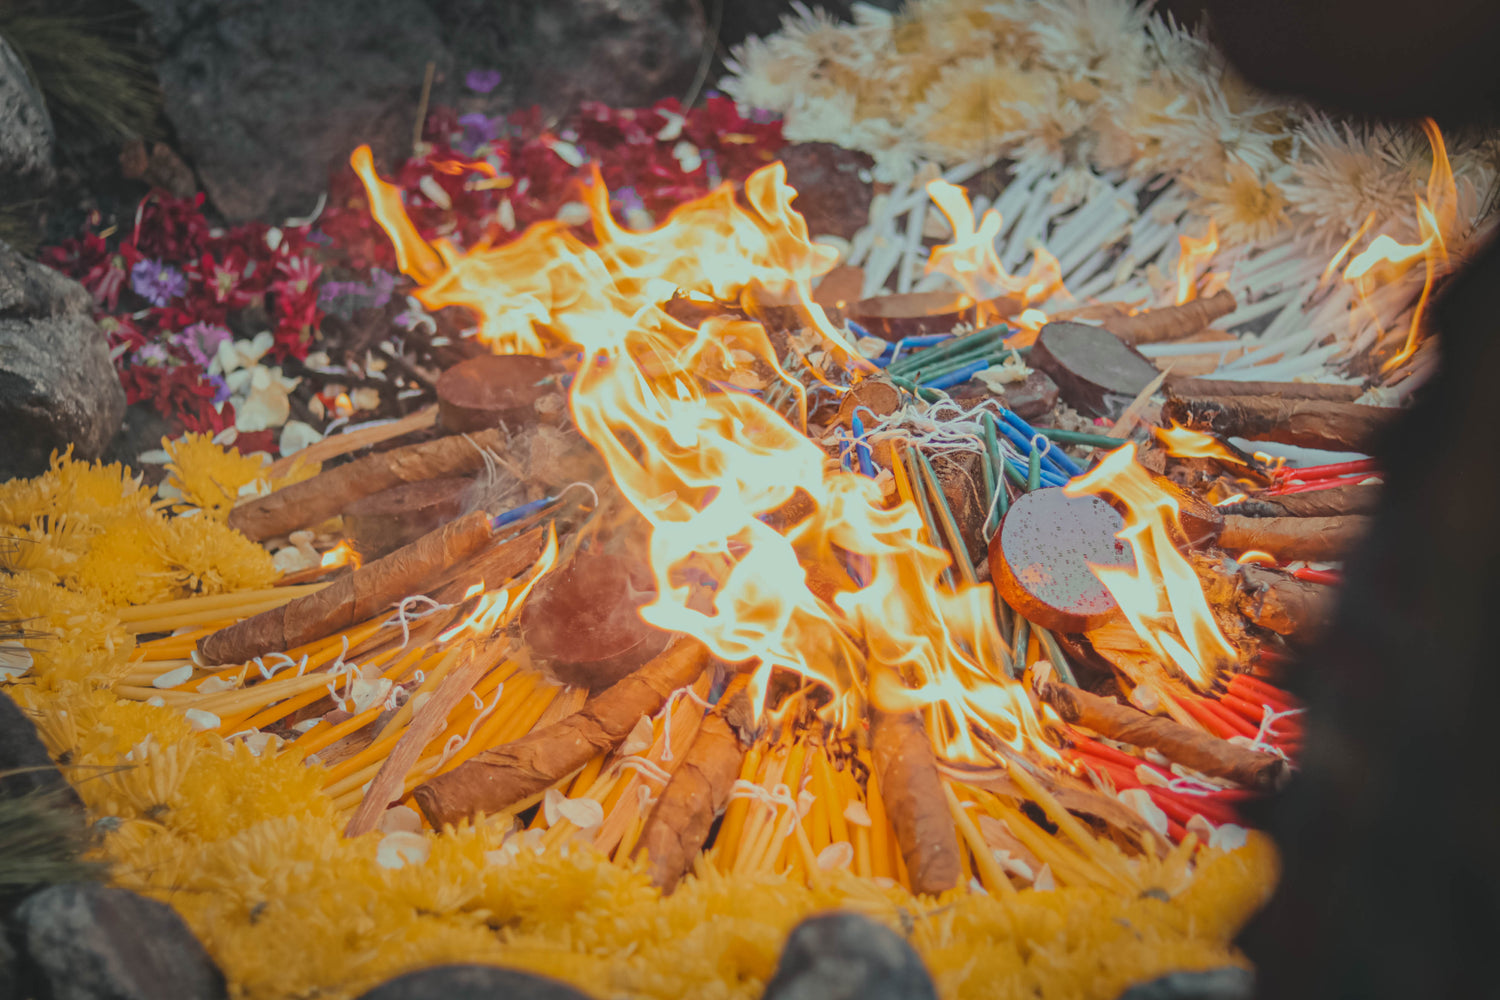 Fire ceremony by mayan leaders.